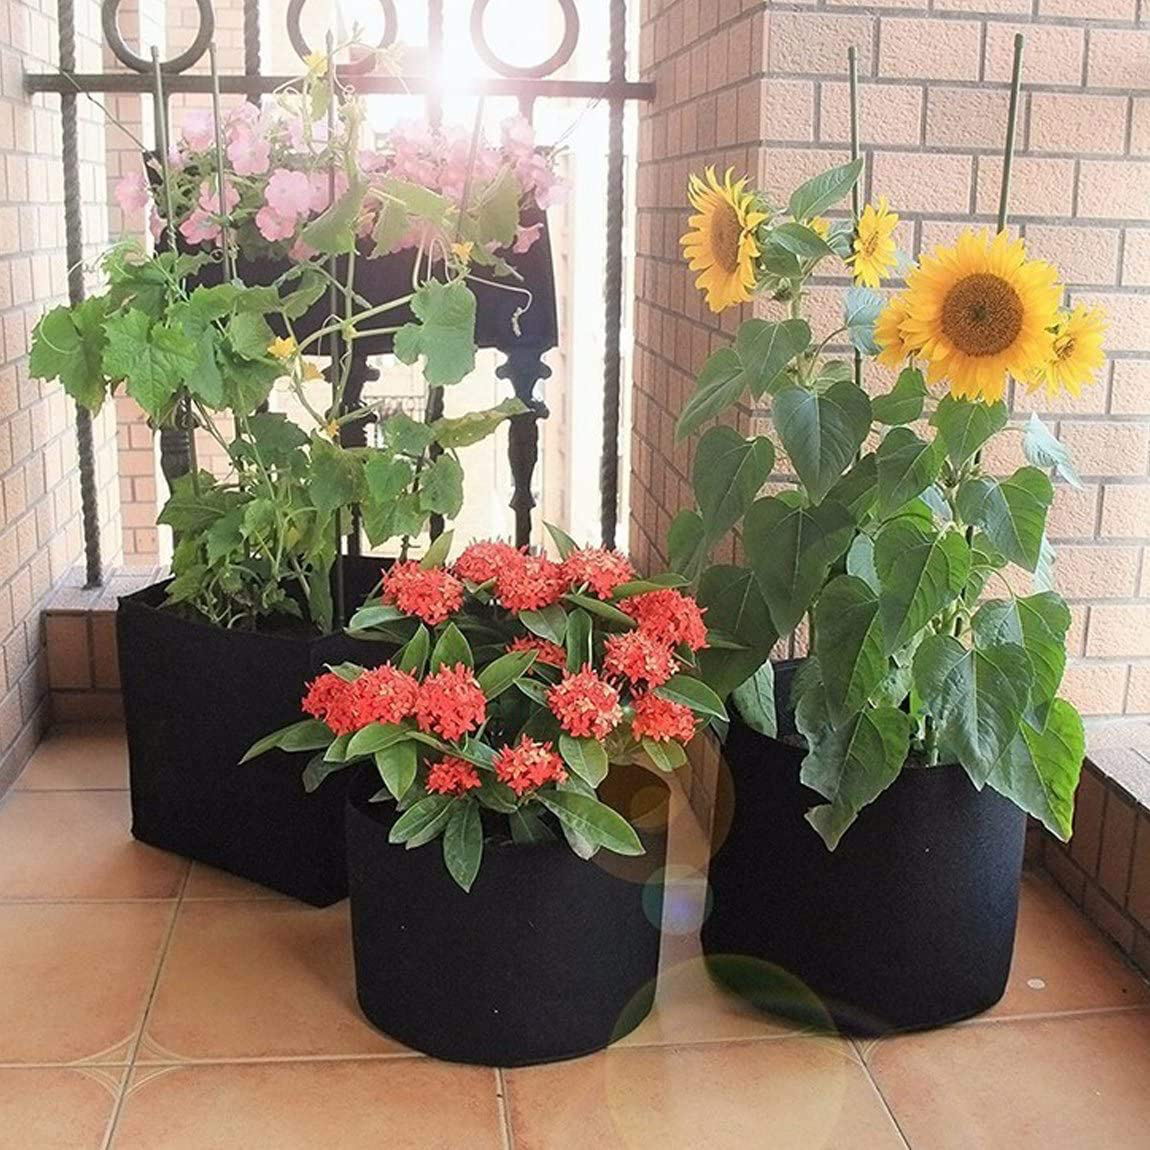 Multi-Pack Heavy Duty Thickened Non-woven Fabric Plant Pots with Handles